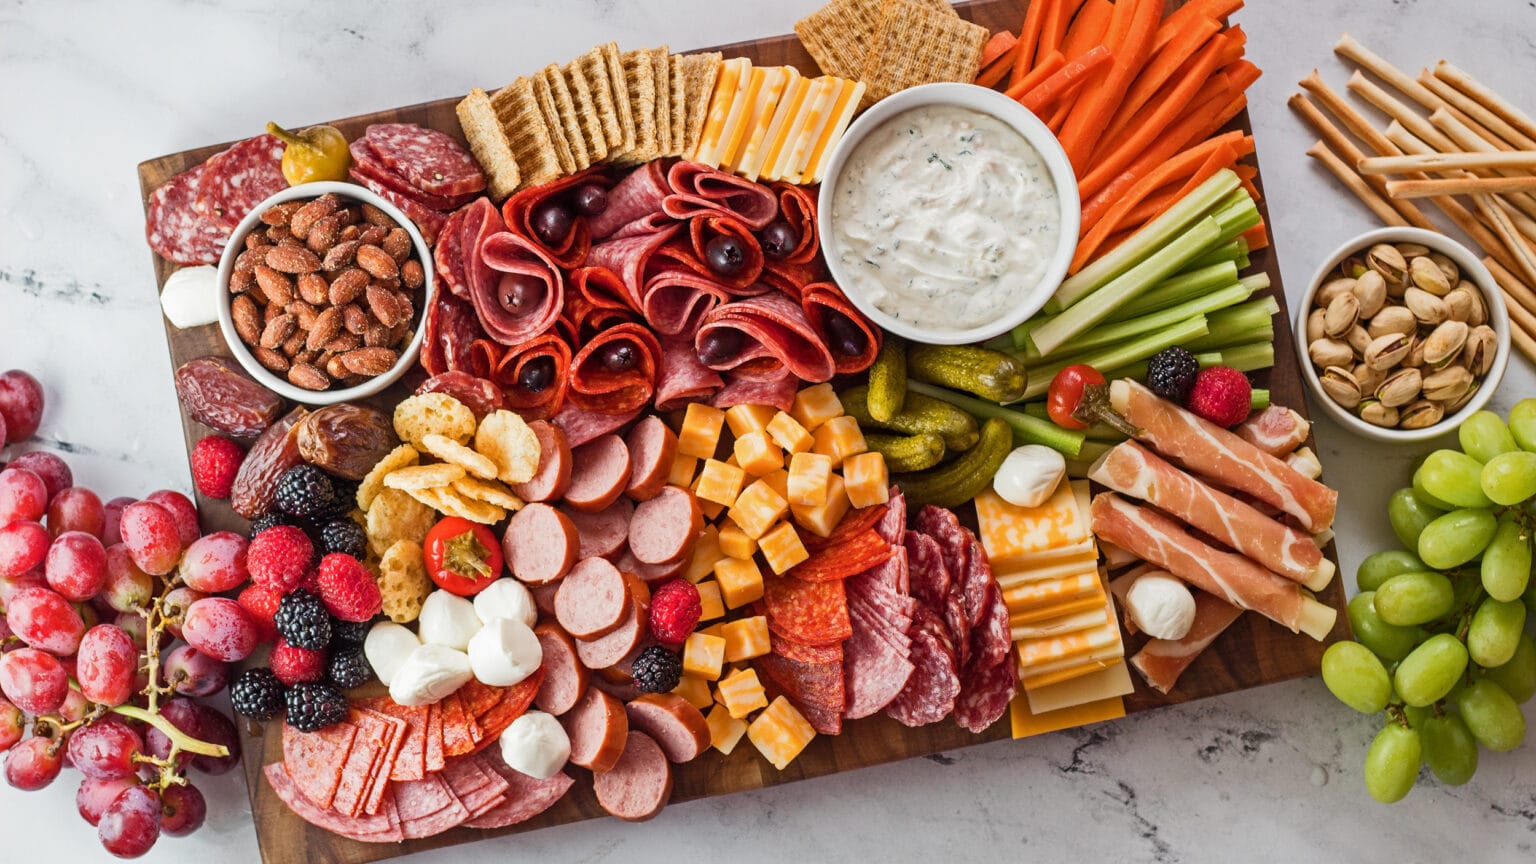 Charcuterie Board from Simple to Holiday Centerpiece